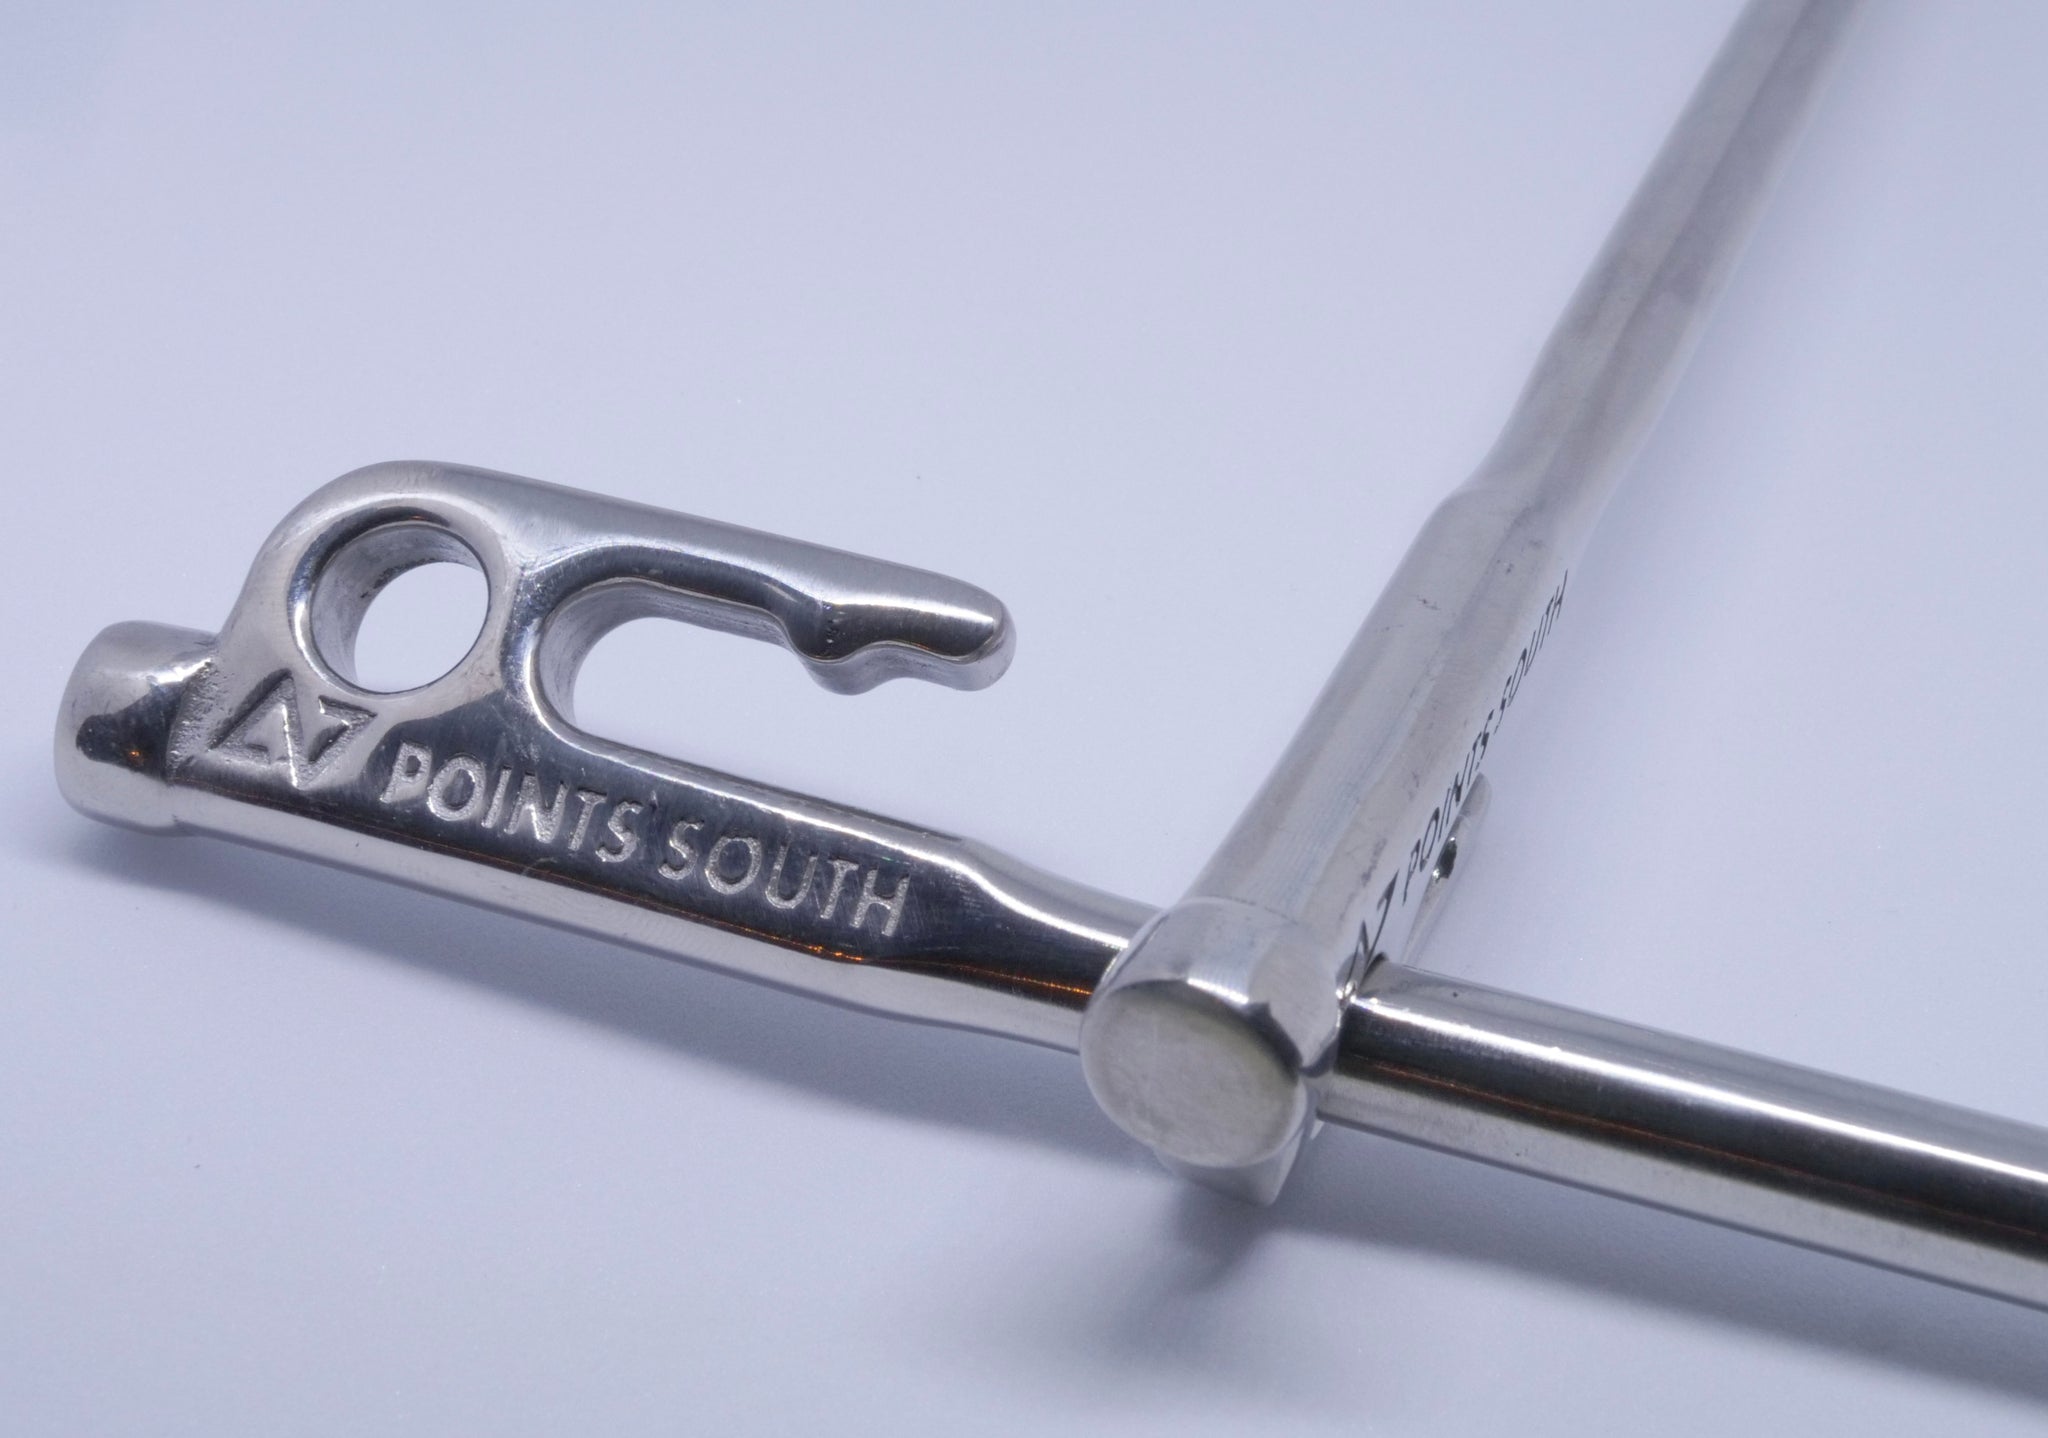 pointssouth stainless tent stake double